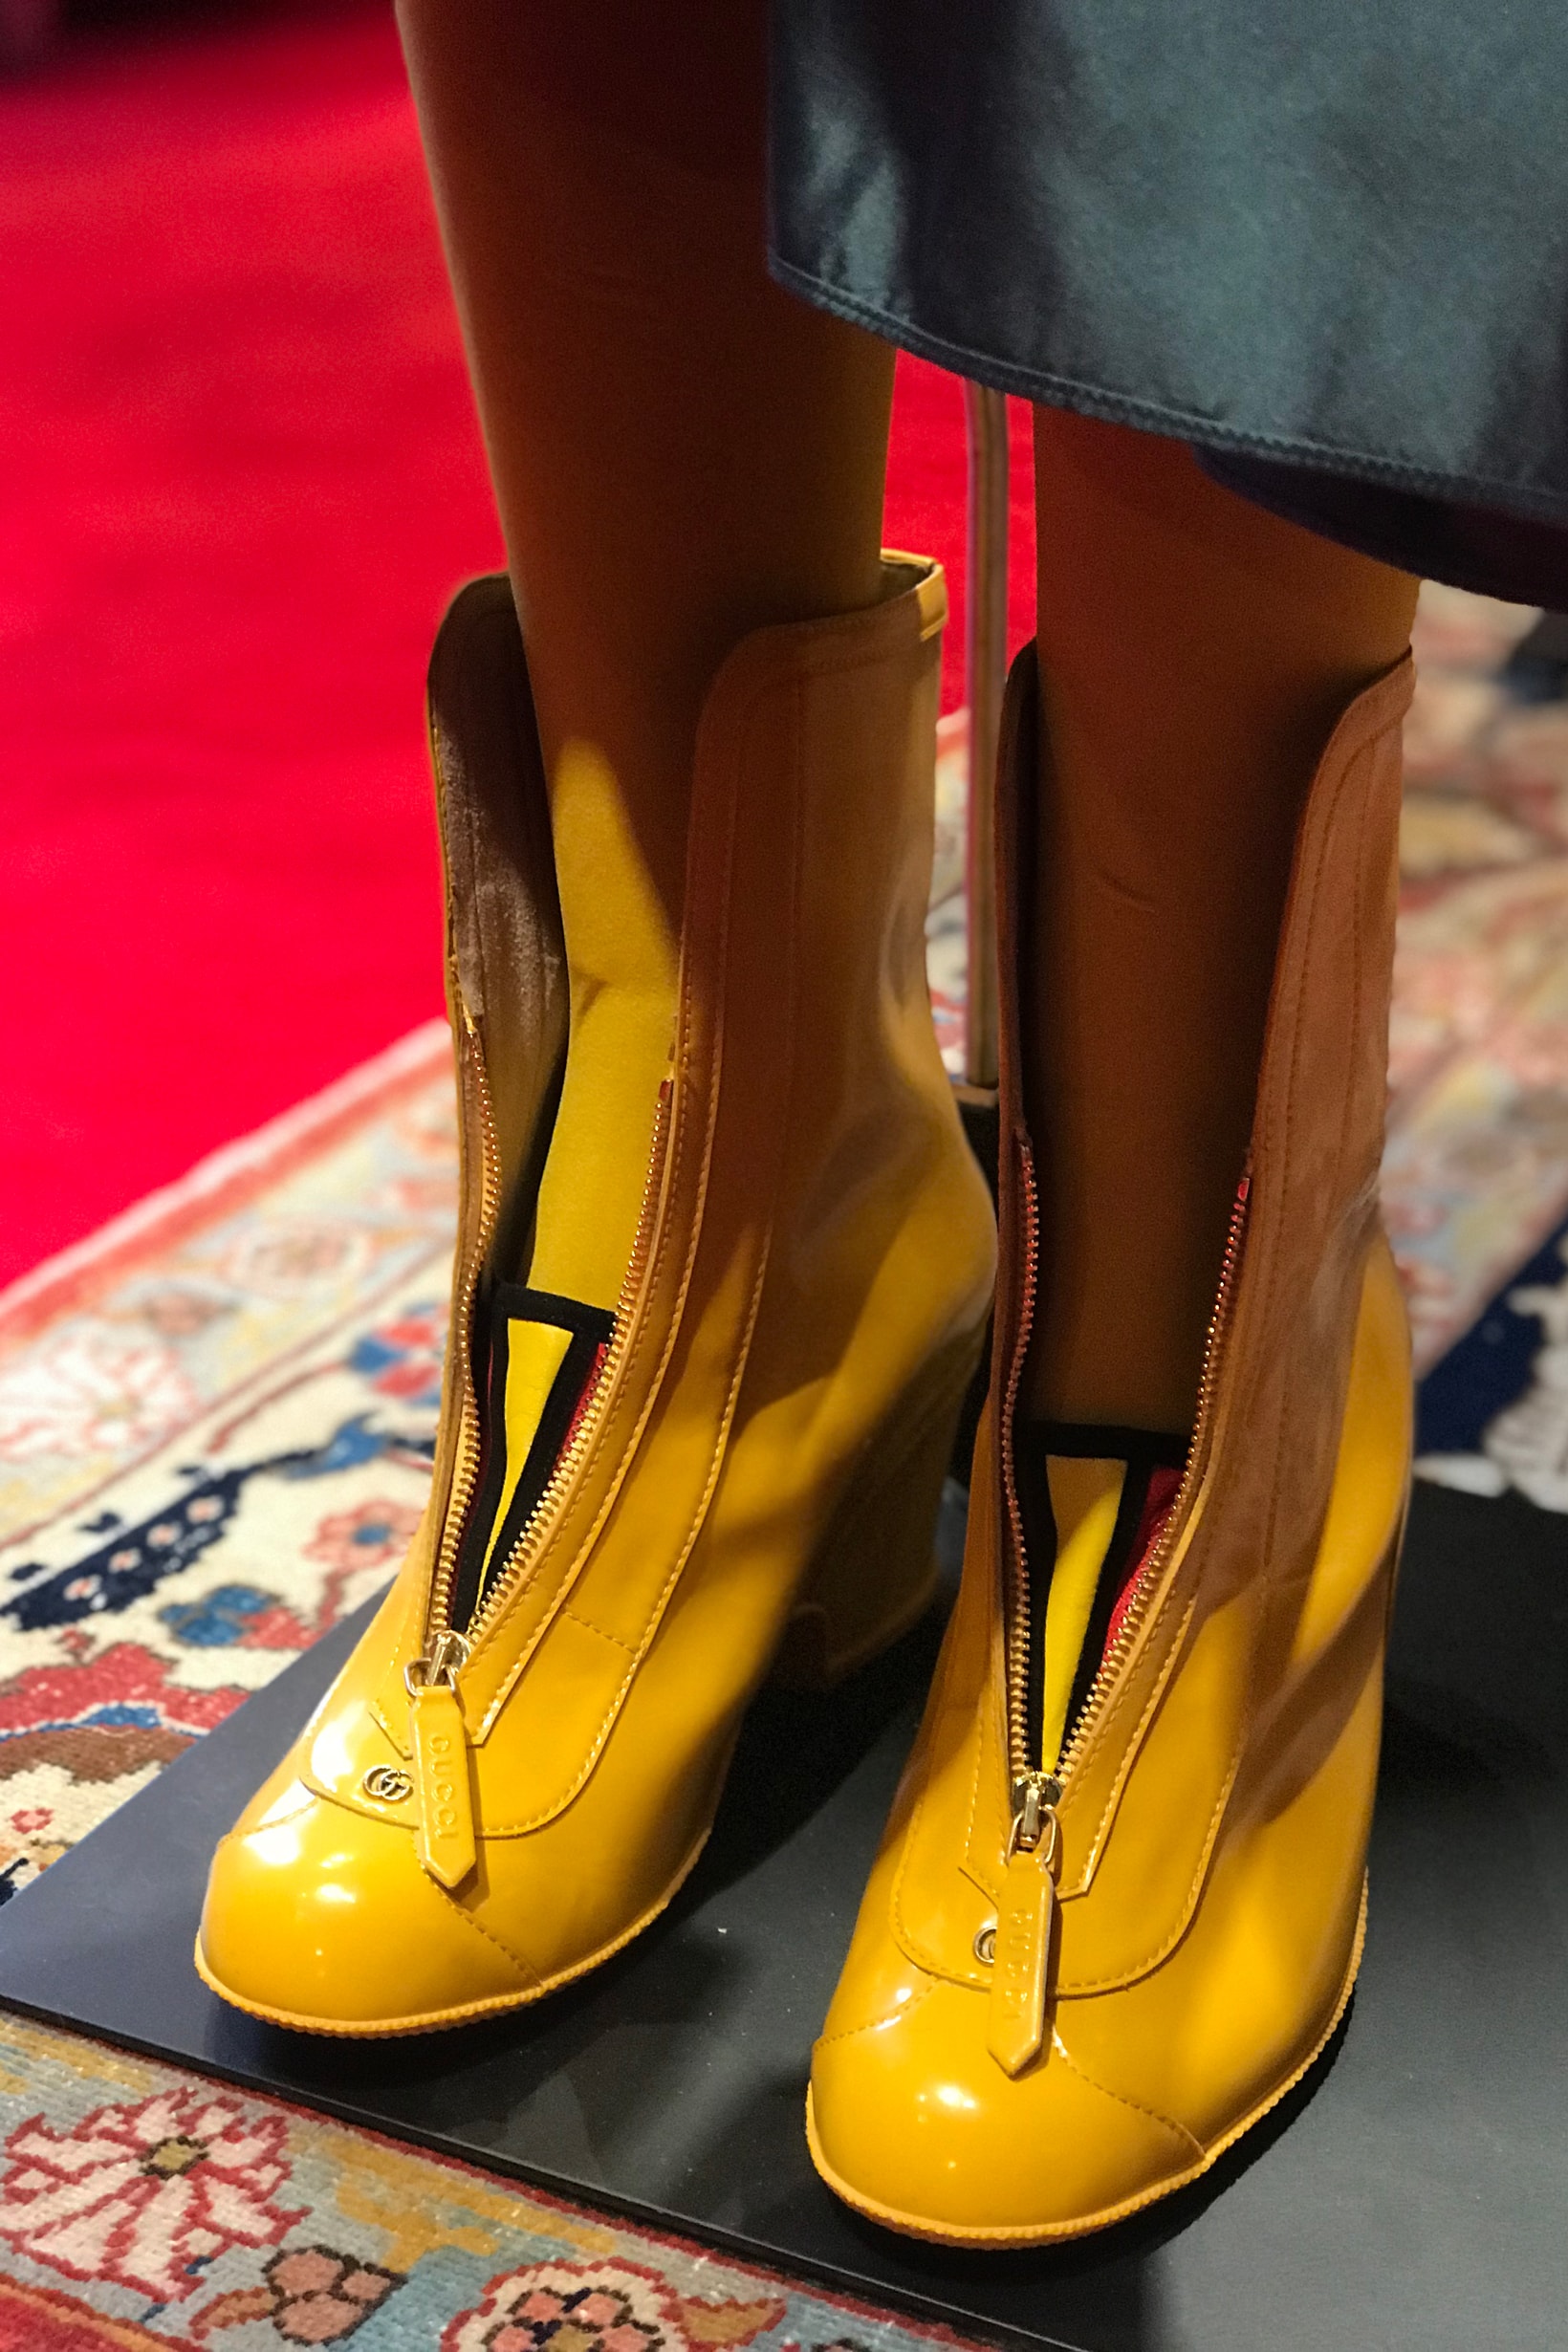 Gucci Fall Winter 2019 Collection Shoes Yellow